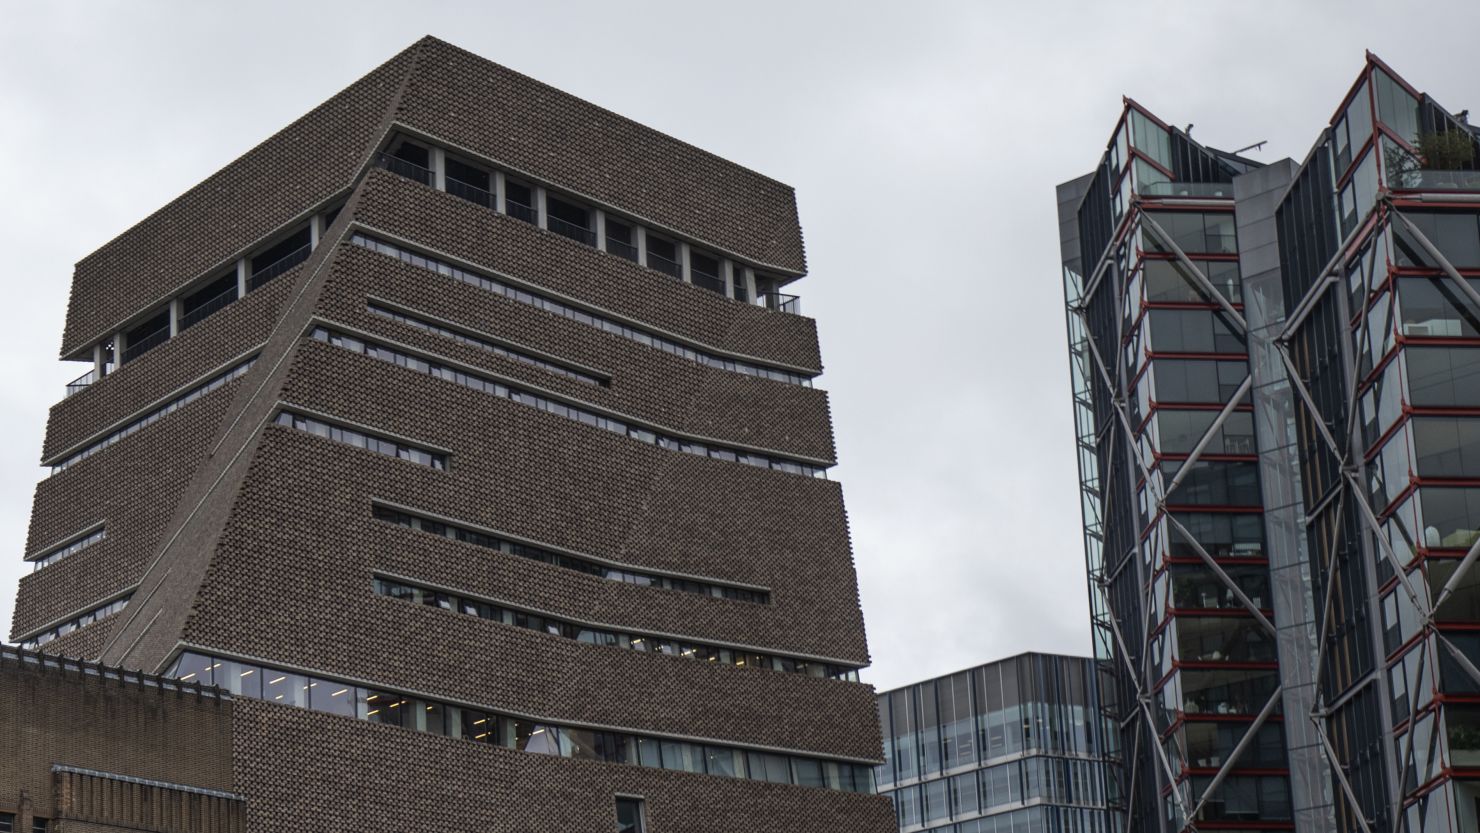 Tate Modern's viewing platform (left) and the apartment block (right).